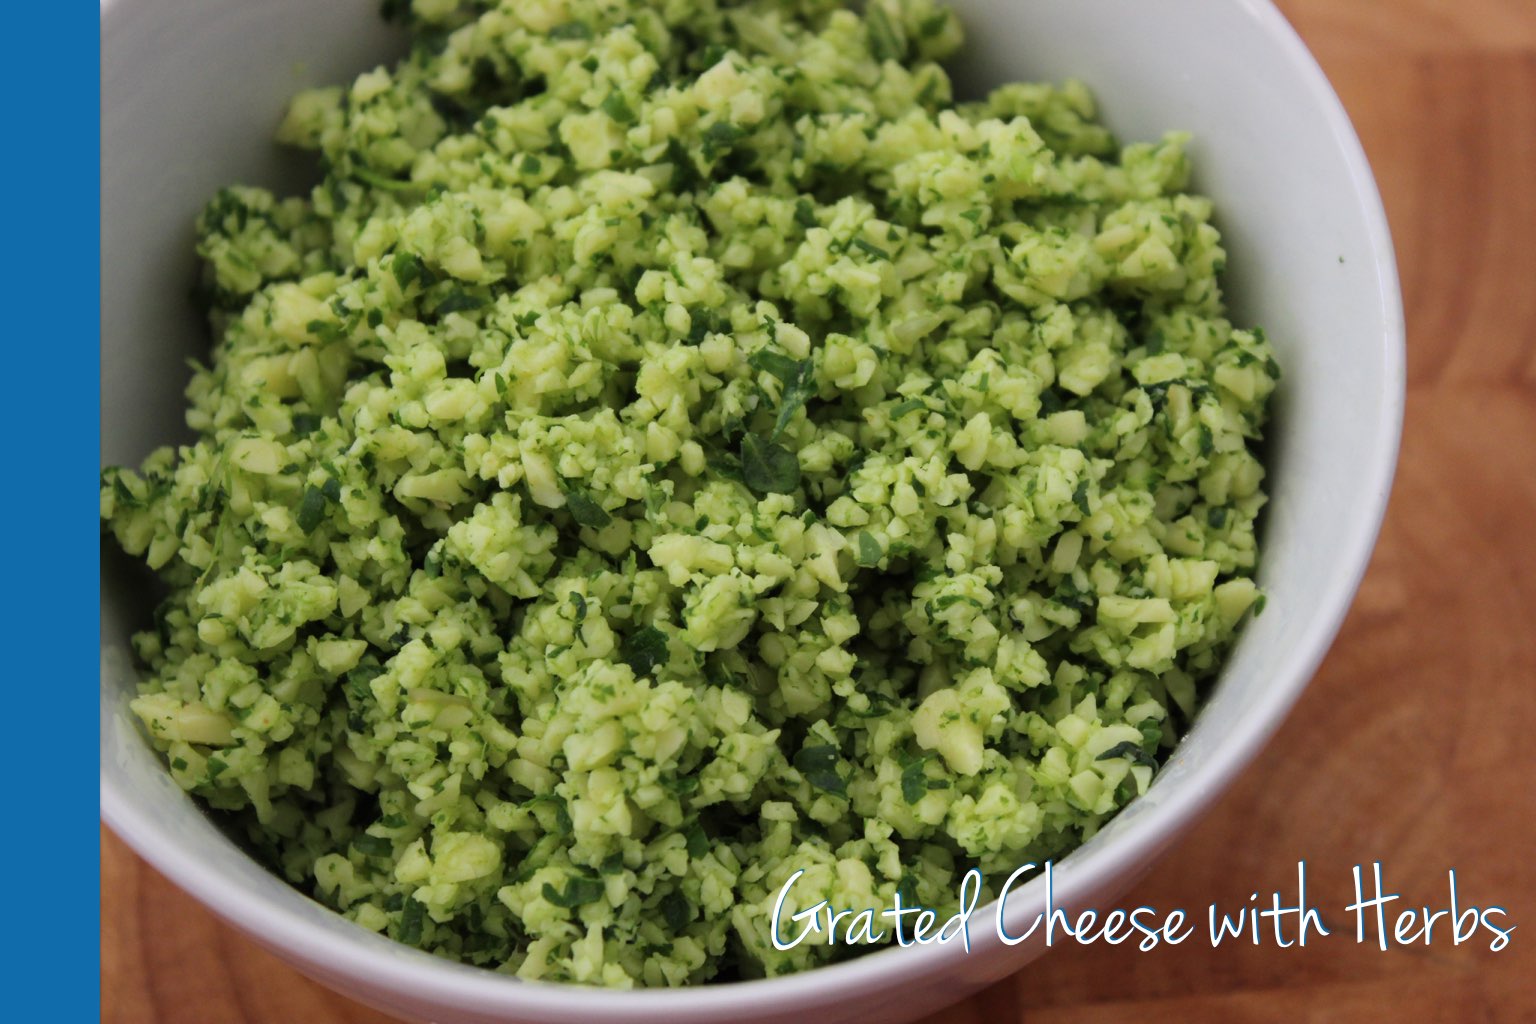 Grated Cheese with Herbs_1